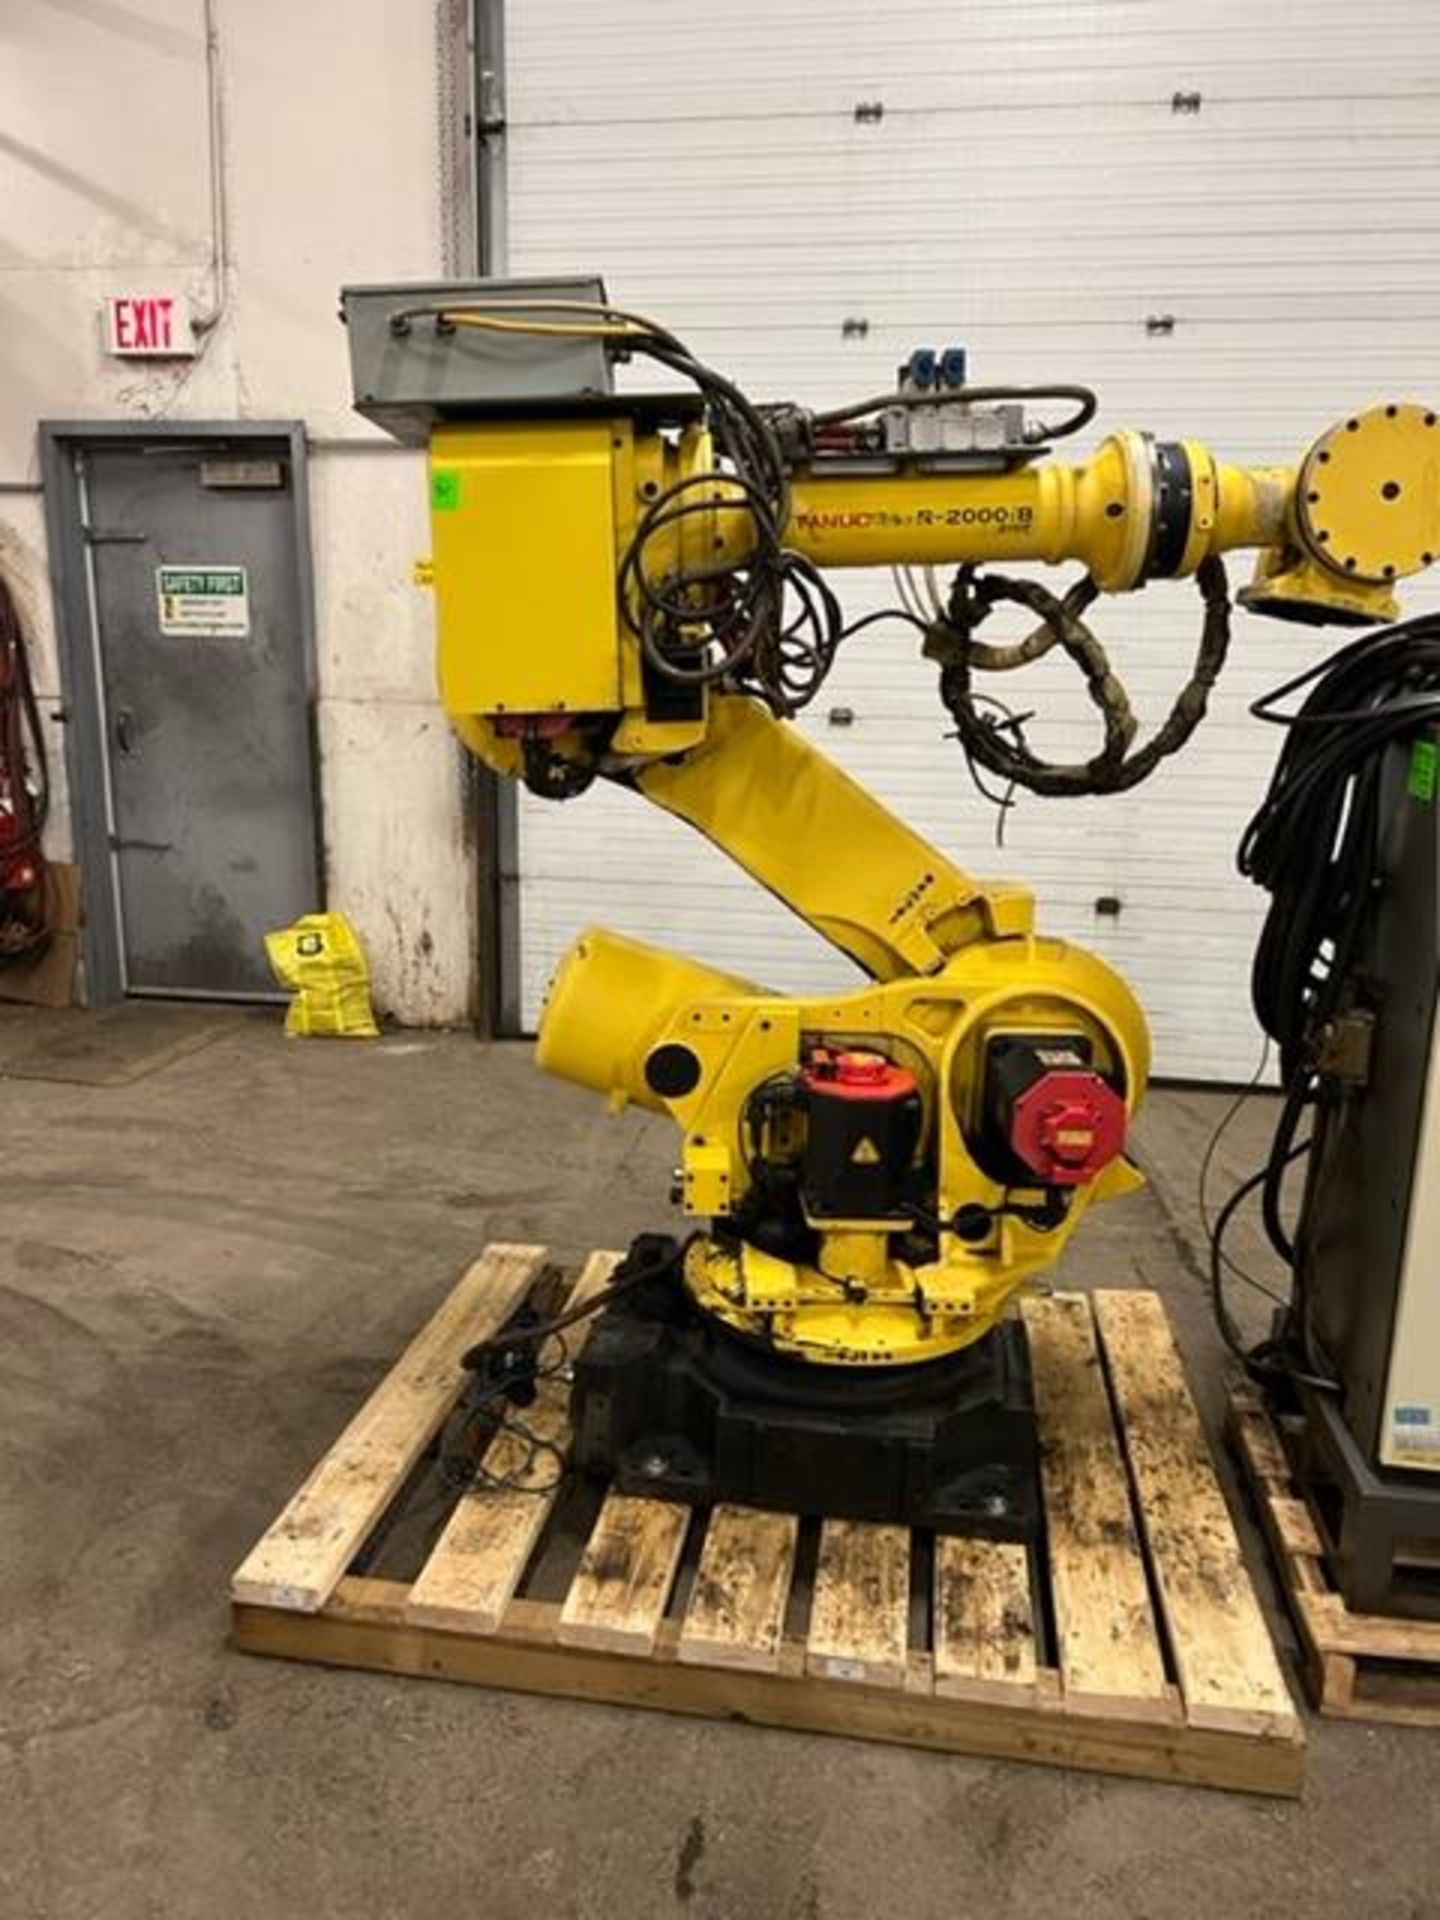 MINT 2012 Fanuc Handling Robot Model R-2000iB 210F - 210kg payload with R-30iA Controller and - Image 5 of 5